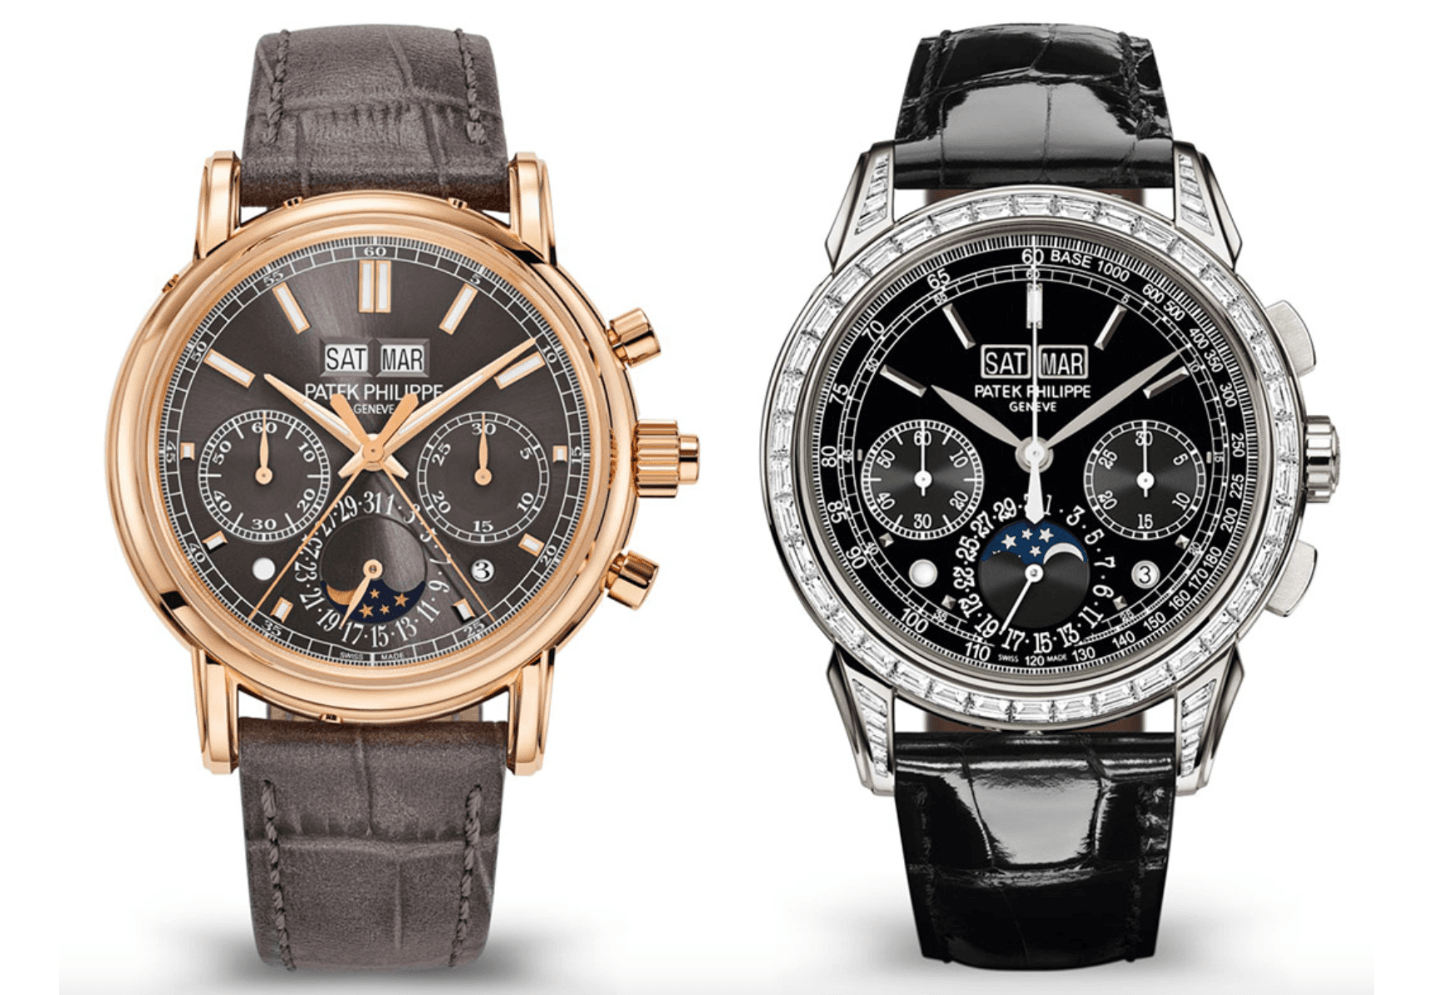 Patek Philippe Perpetual Calendar Chronograph Reference 5204R-011 and 5271P-001 